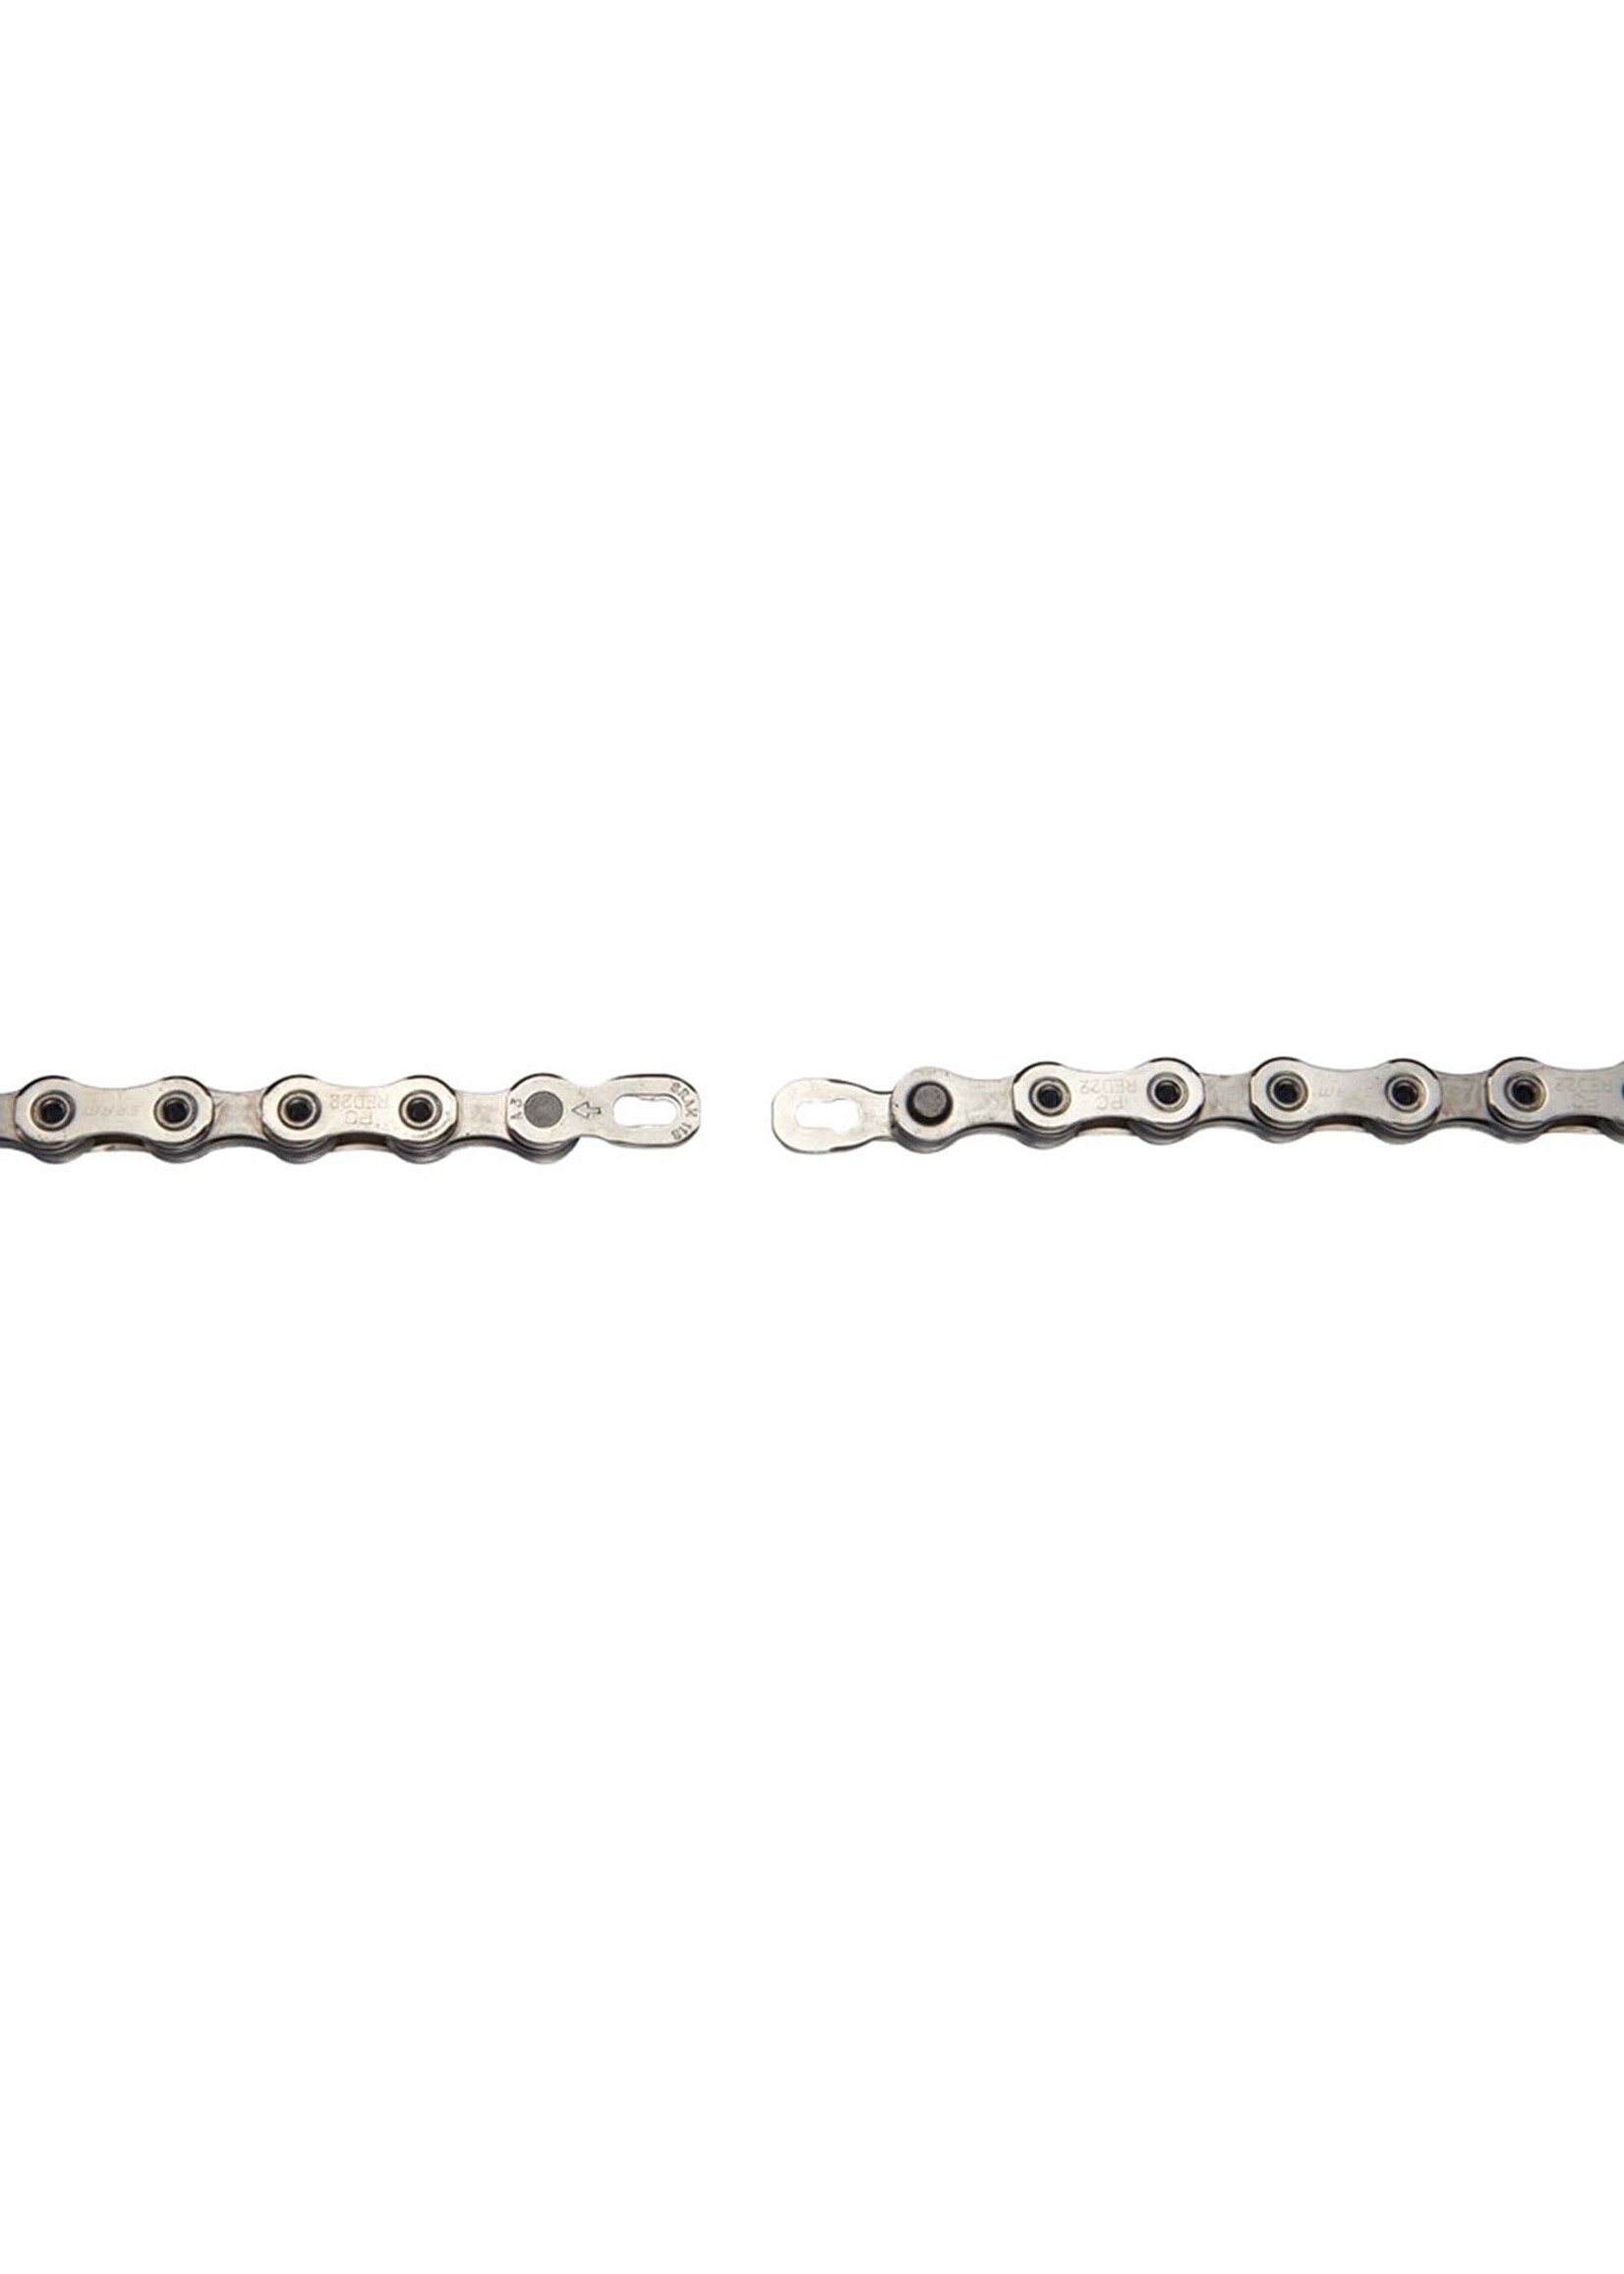 Sram SRAM RED HOLLOW PIN 11 SPEED CHAIN SILVER 114 LINK WITH POWERLOCK